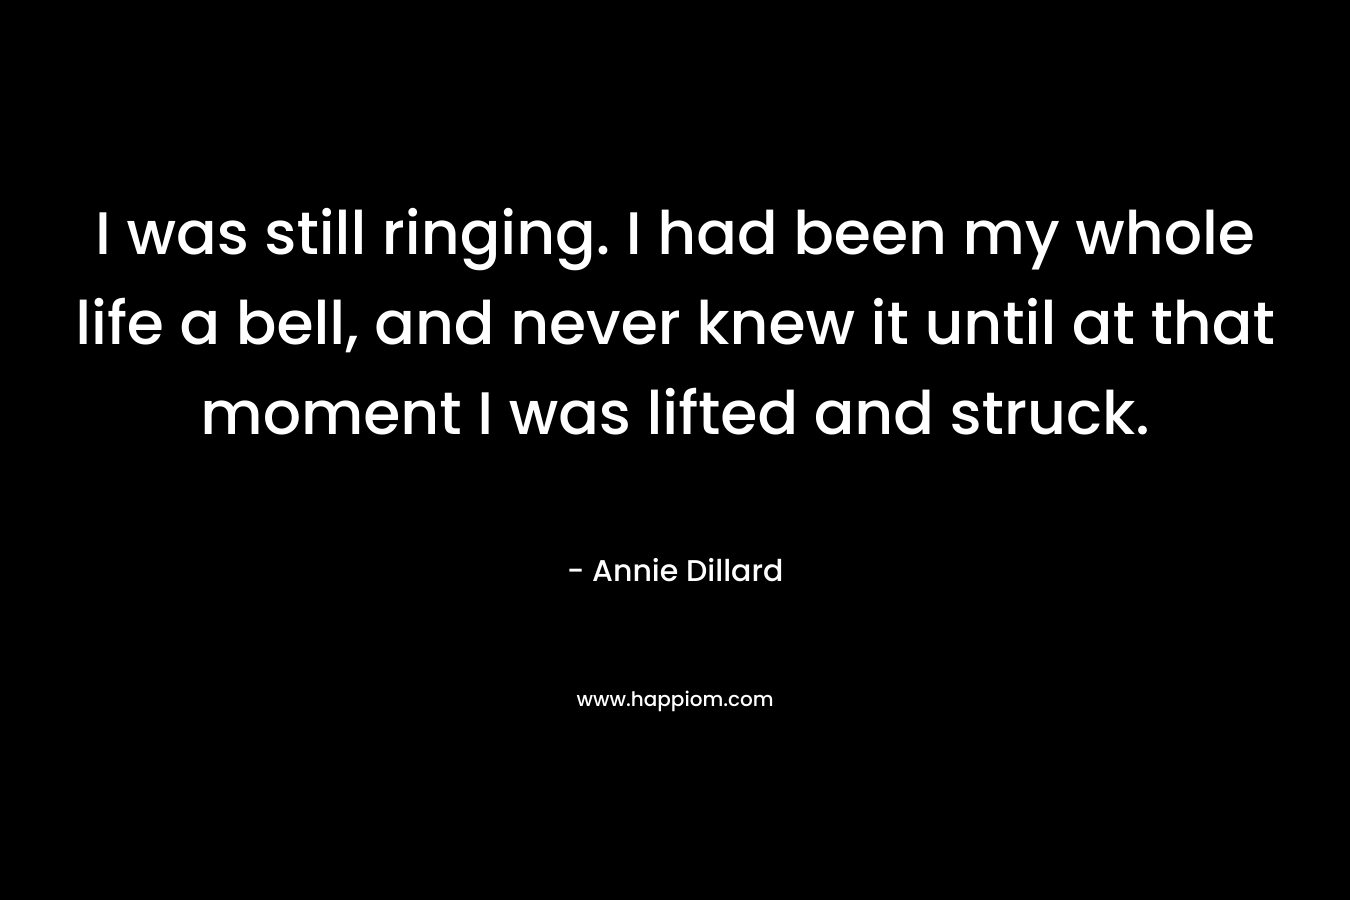 I was still ringing. I had been my whole life a bell, and never knew it until at that moment I was lifted and struck. – Annie Dillard